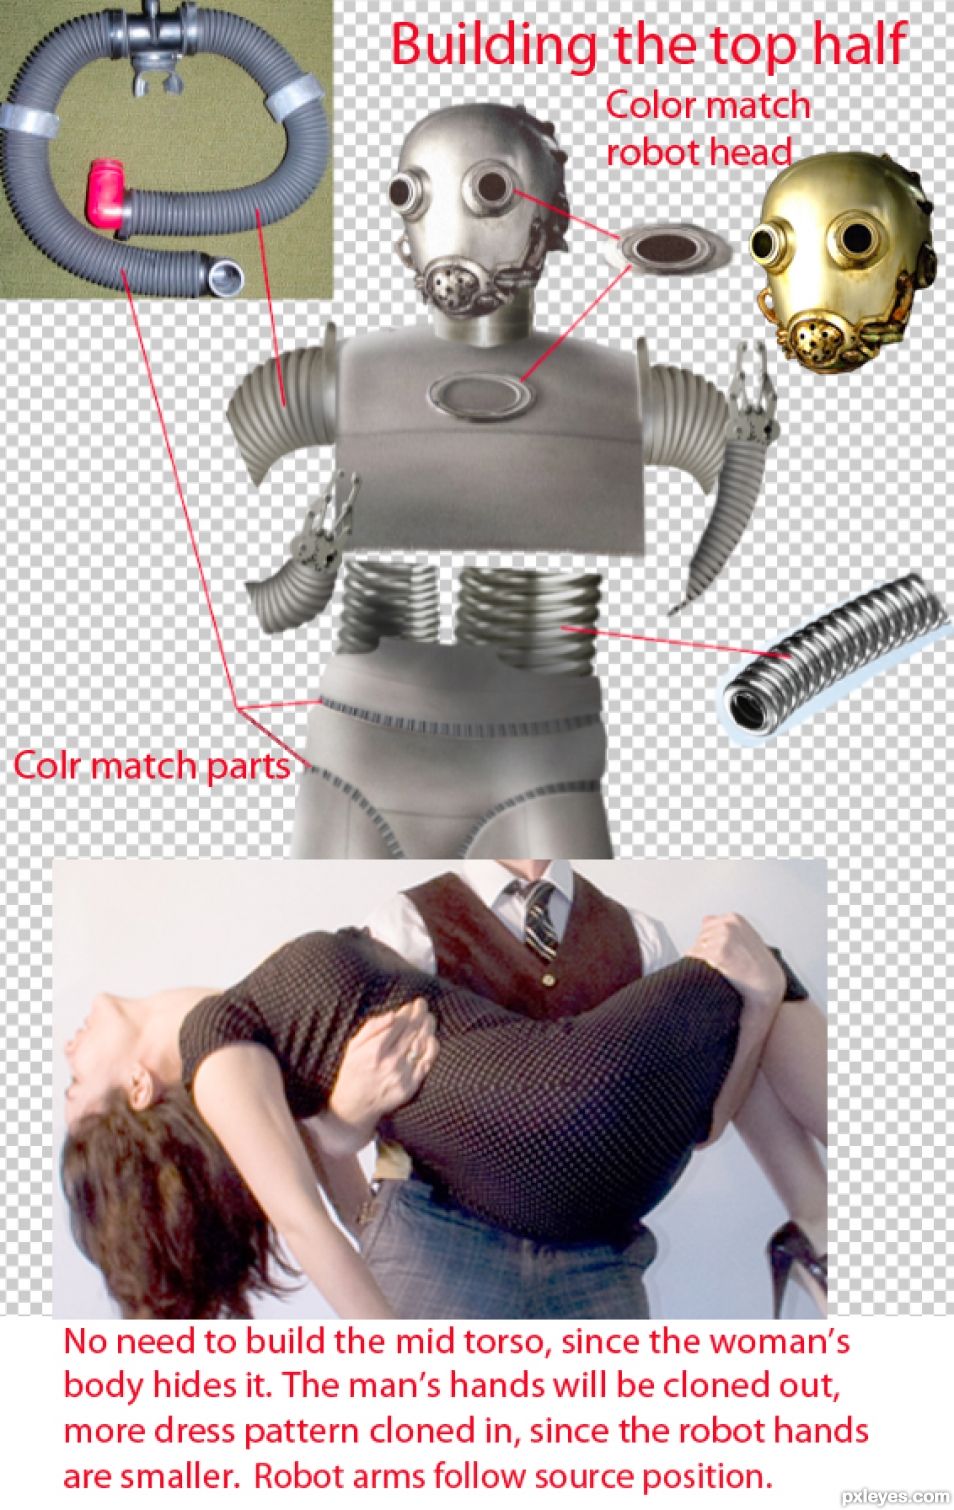 Creation of ROBOT: Friend or Foe?: Step 3